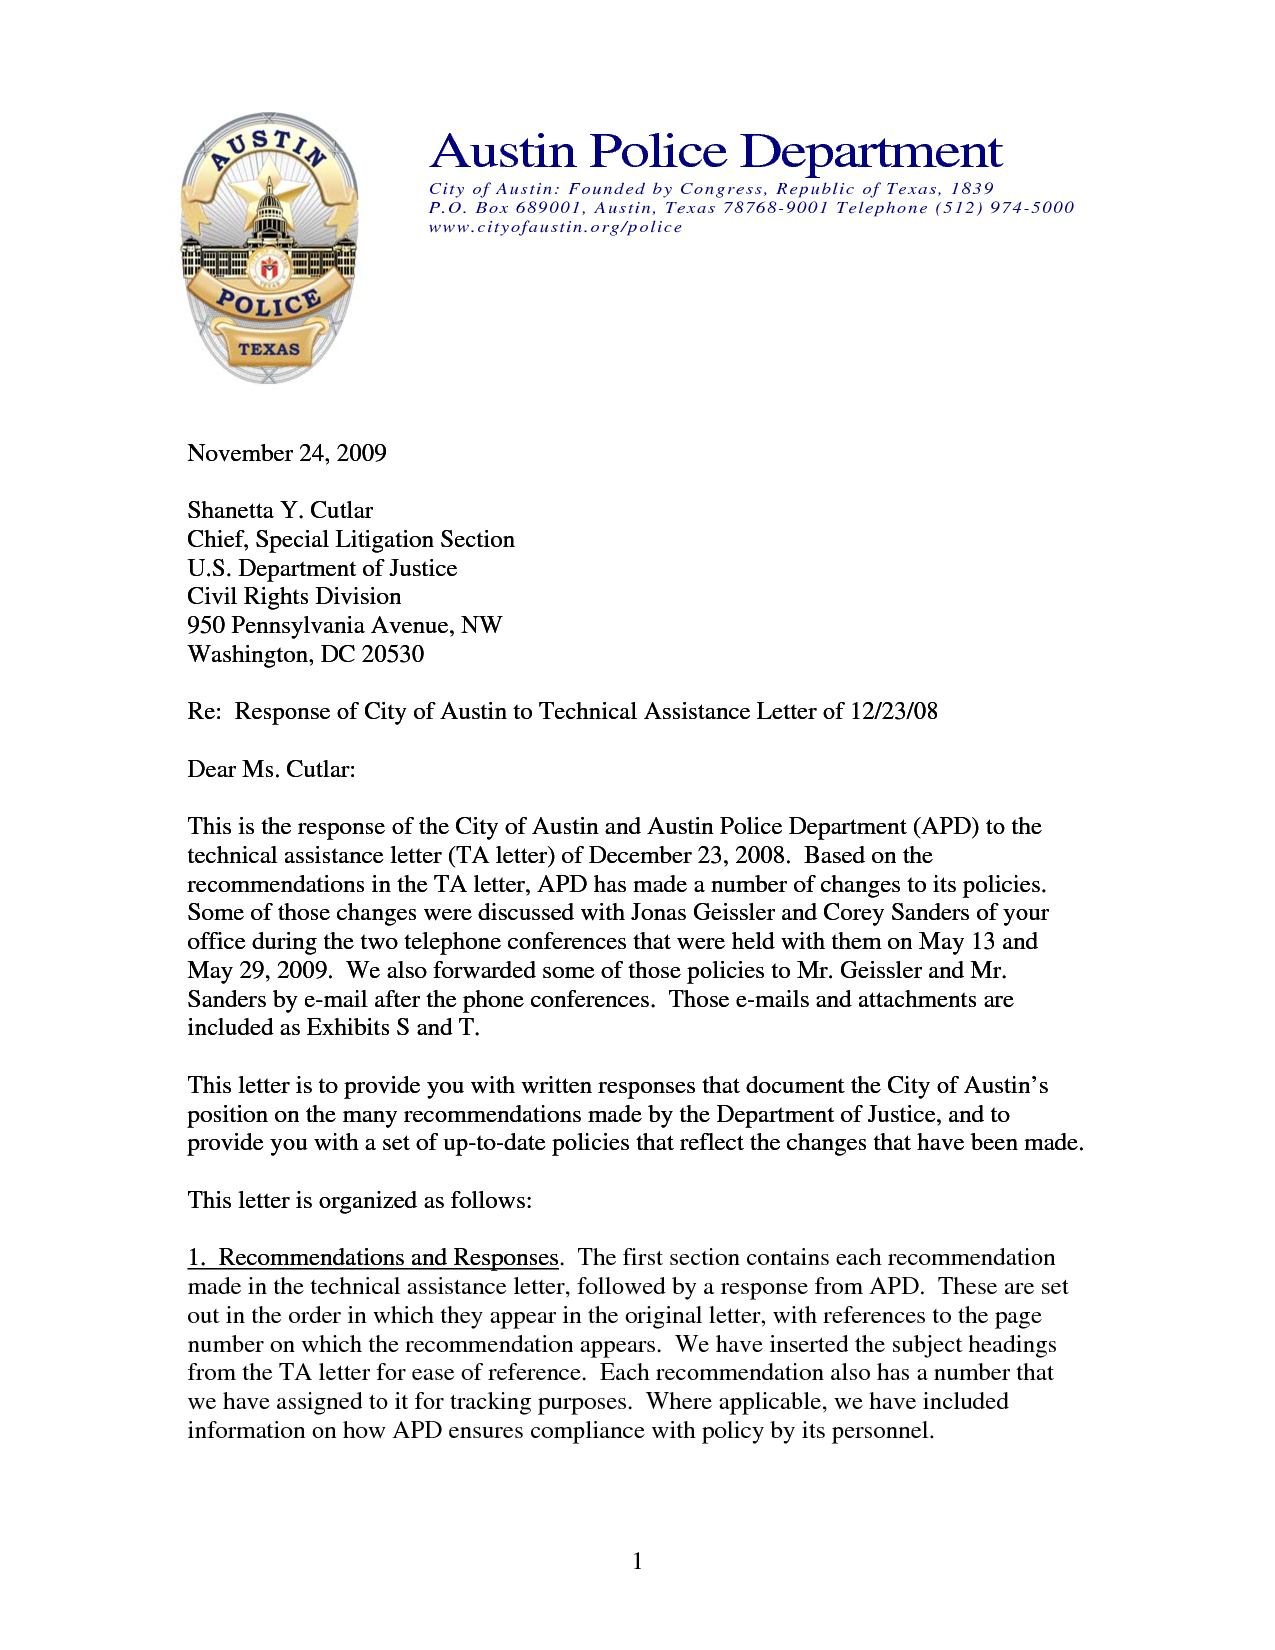 Letters Of Recommendation For Police Officers Free Resume with regard to dimensions 1275 X 1650